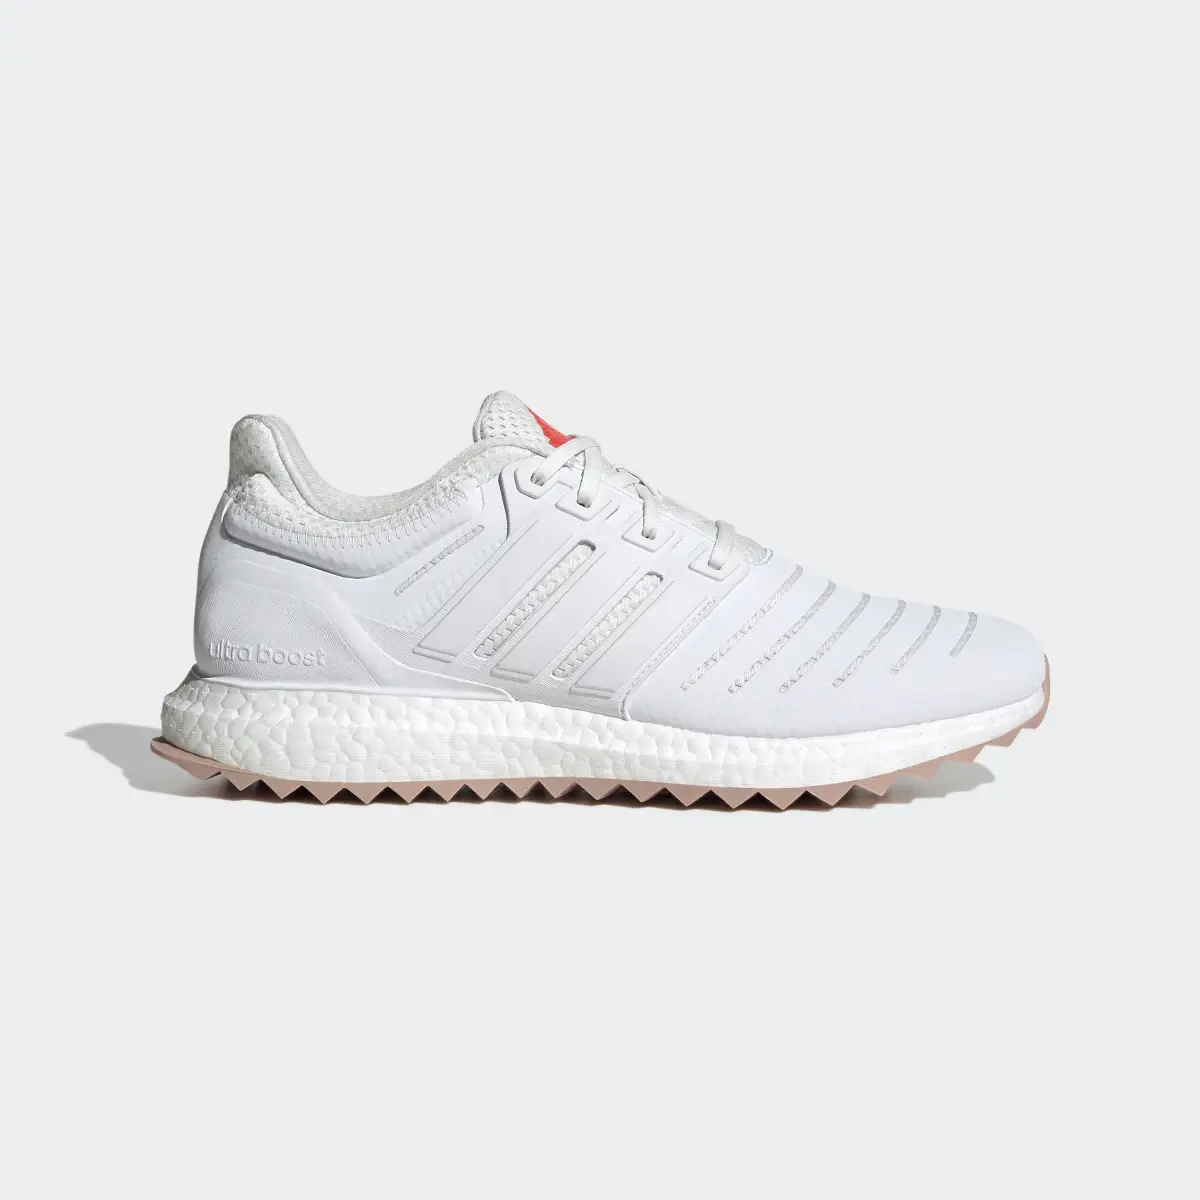 Adidas Ultraboost DNA XXII Lifestyle Running Sportswear Capsule Collection Shoes. 2